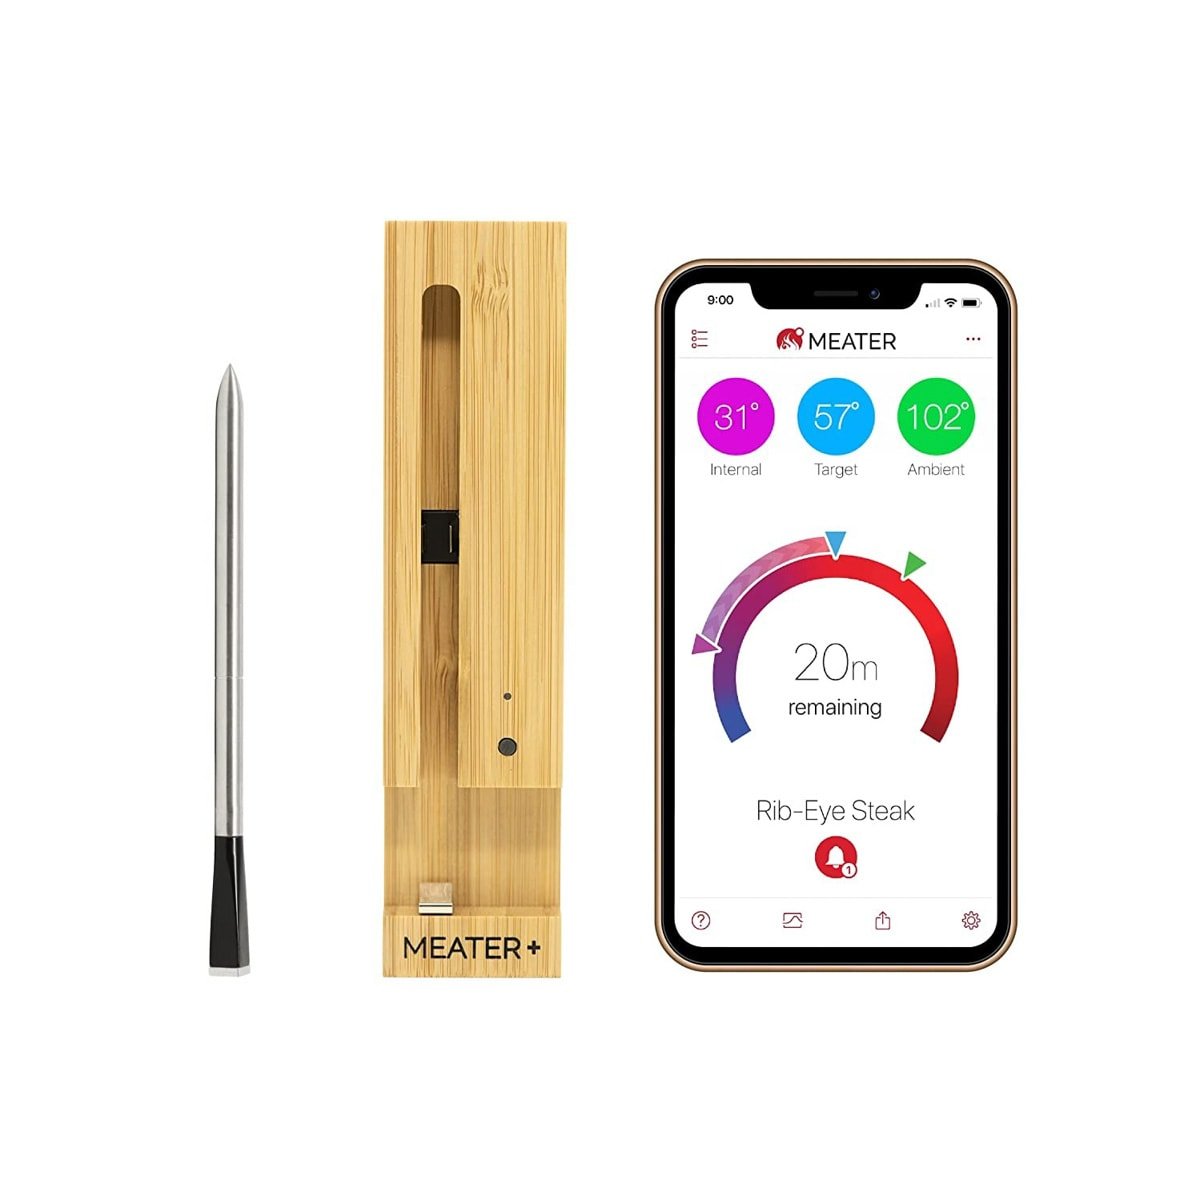 A smart thermometer next to a wooden case to hold the thermometer and a cell phone displaying readings from the thermometer.